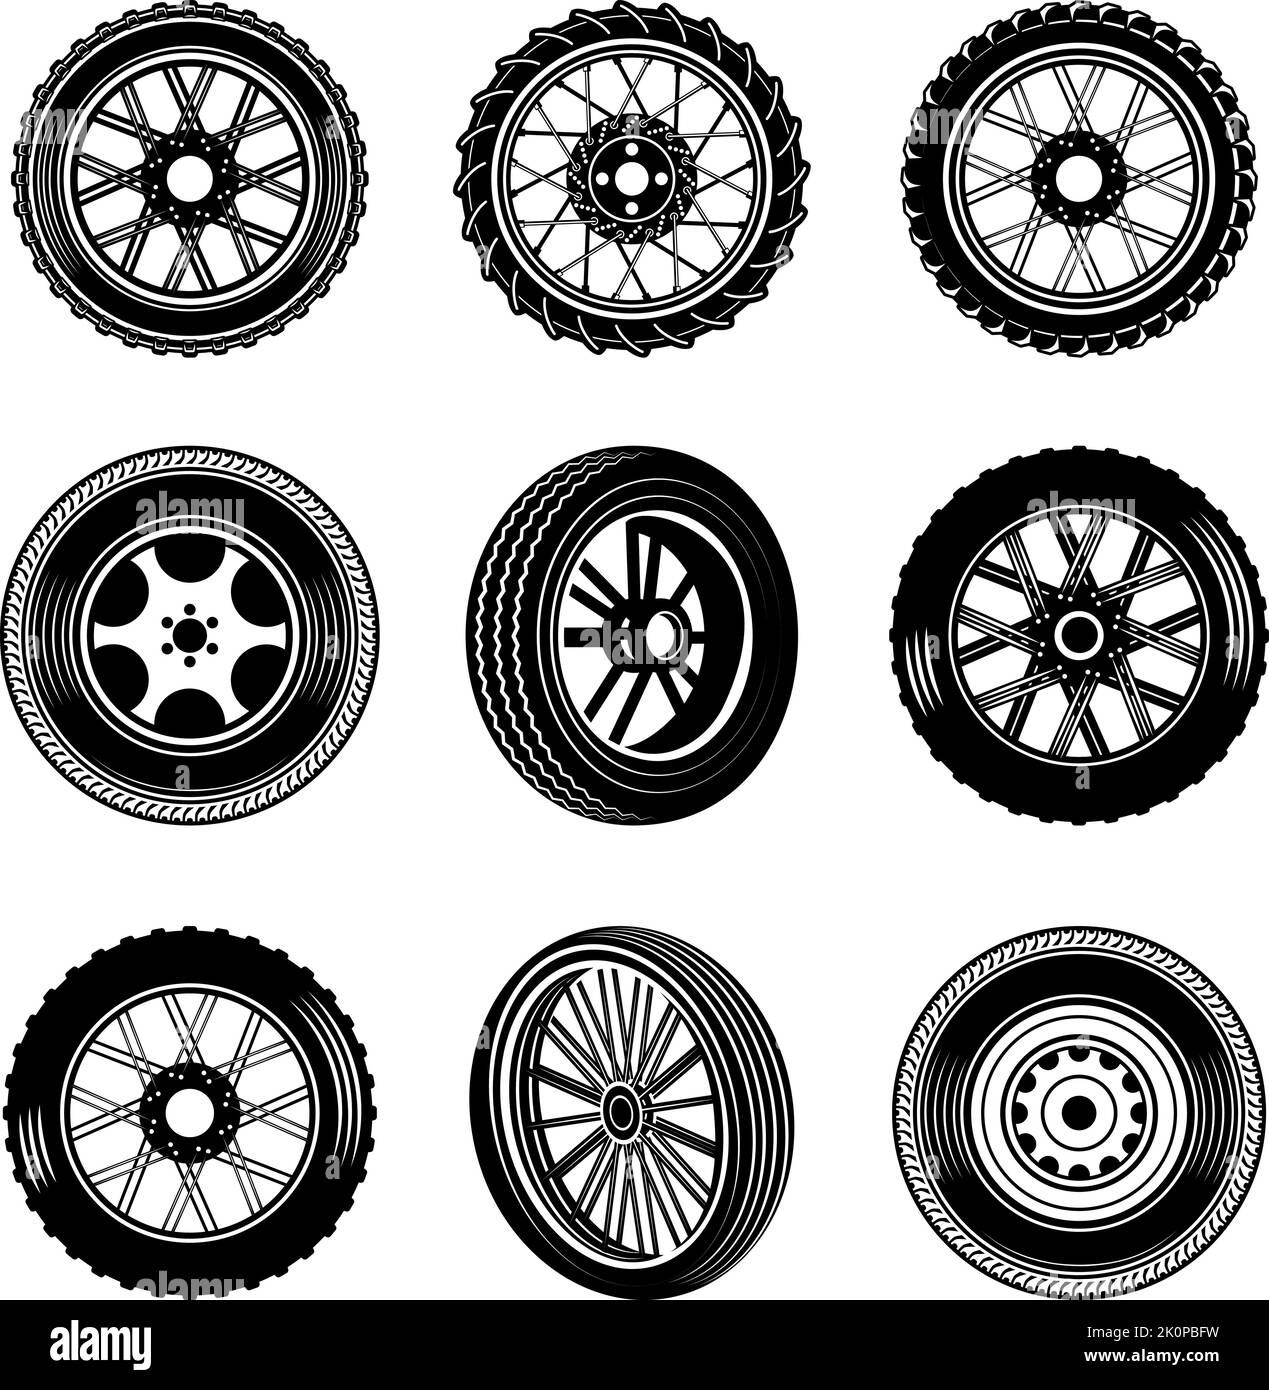 Set of different car and motorcycle wheels in monochrome style. Design element for logo, label, sign, poster, card. Vector illustration Stock Vector